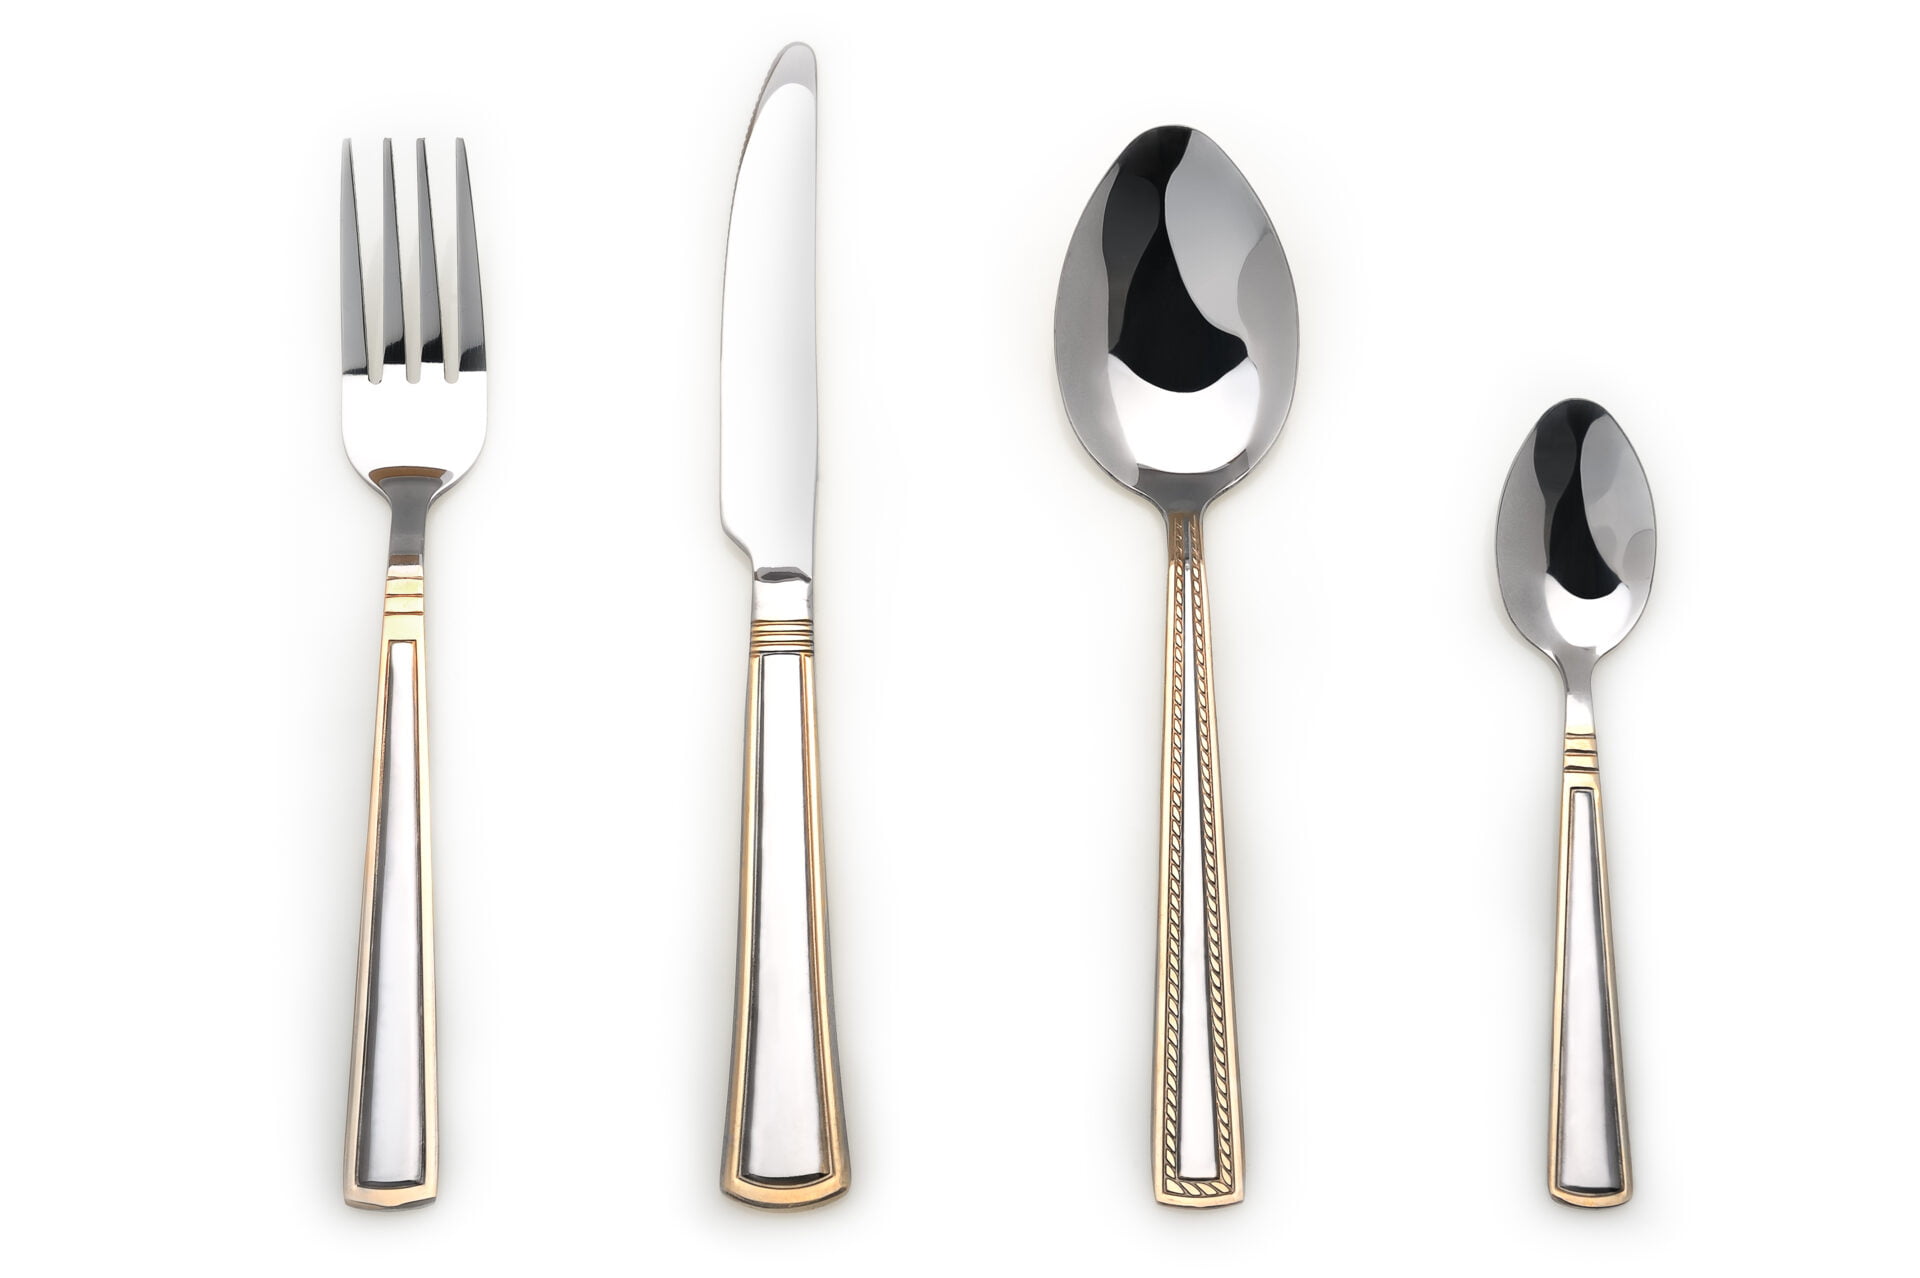 Silverware Set with Fork, Knife, and two Spoon